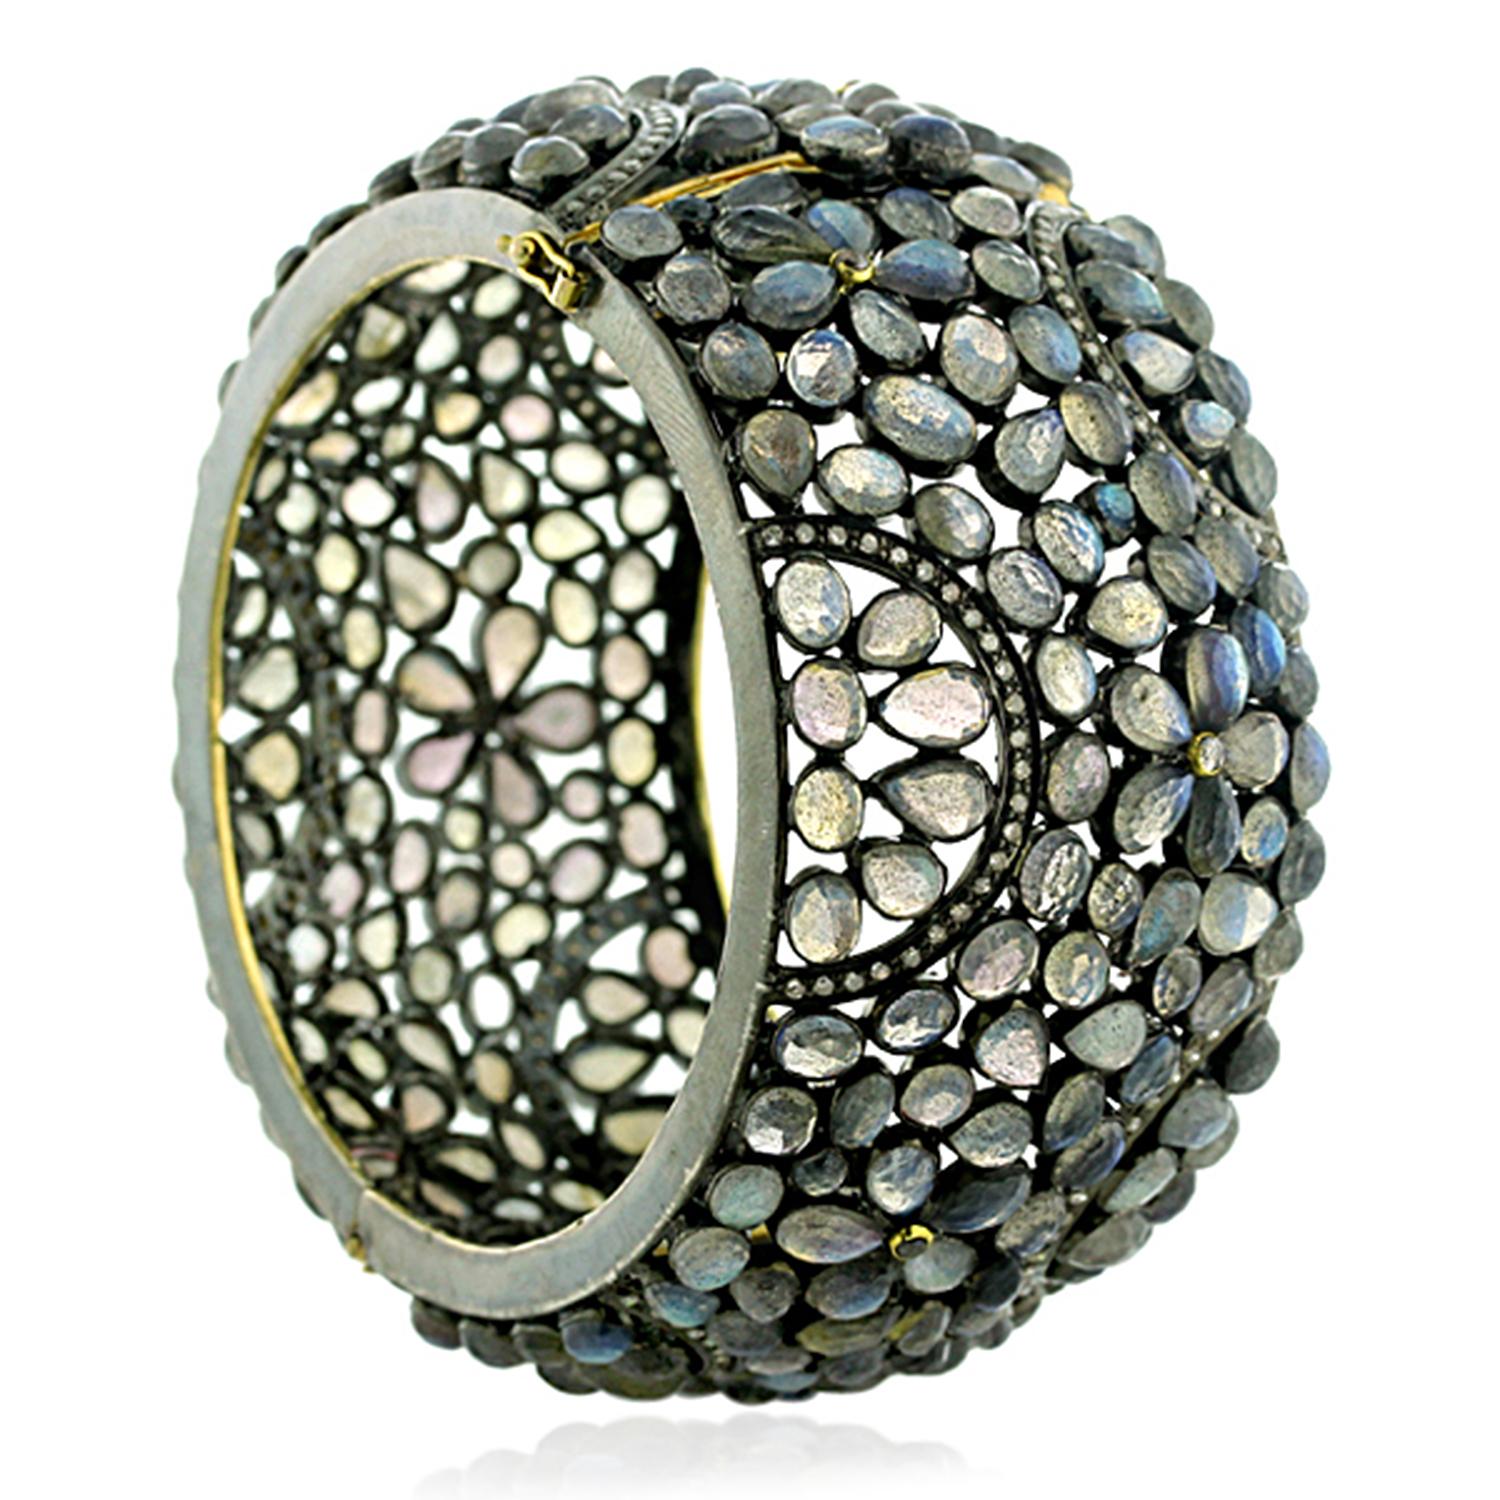 Bold and gothic looking Floral deisgn Labrodorite Cuff with Diamonds made in silver. This bangle is openable on side and has safety clasps on side.

14k: 4.25gms
Diamond: 1.6ct
Slv:32.89gm
Labradorite: 200.00ct

